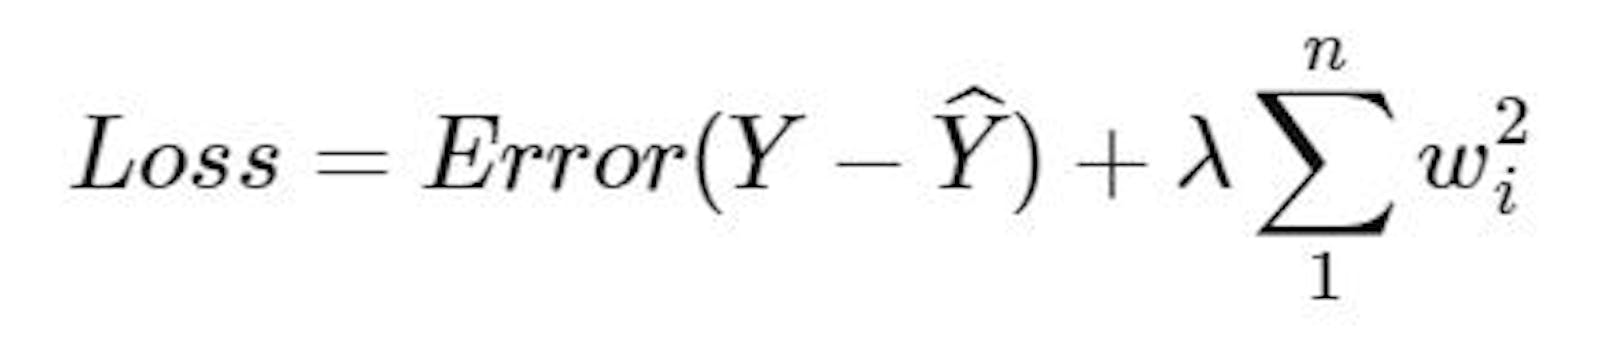 Regularization techniques for reducing variance